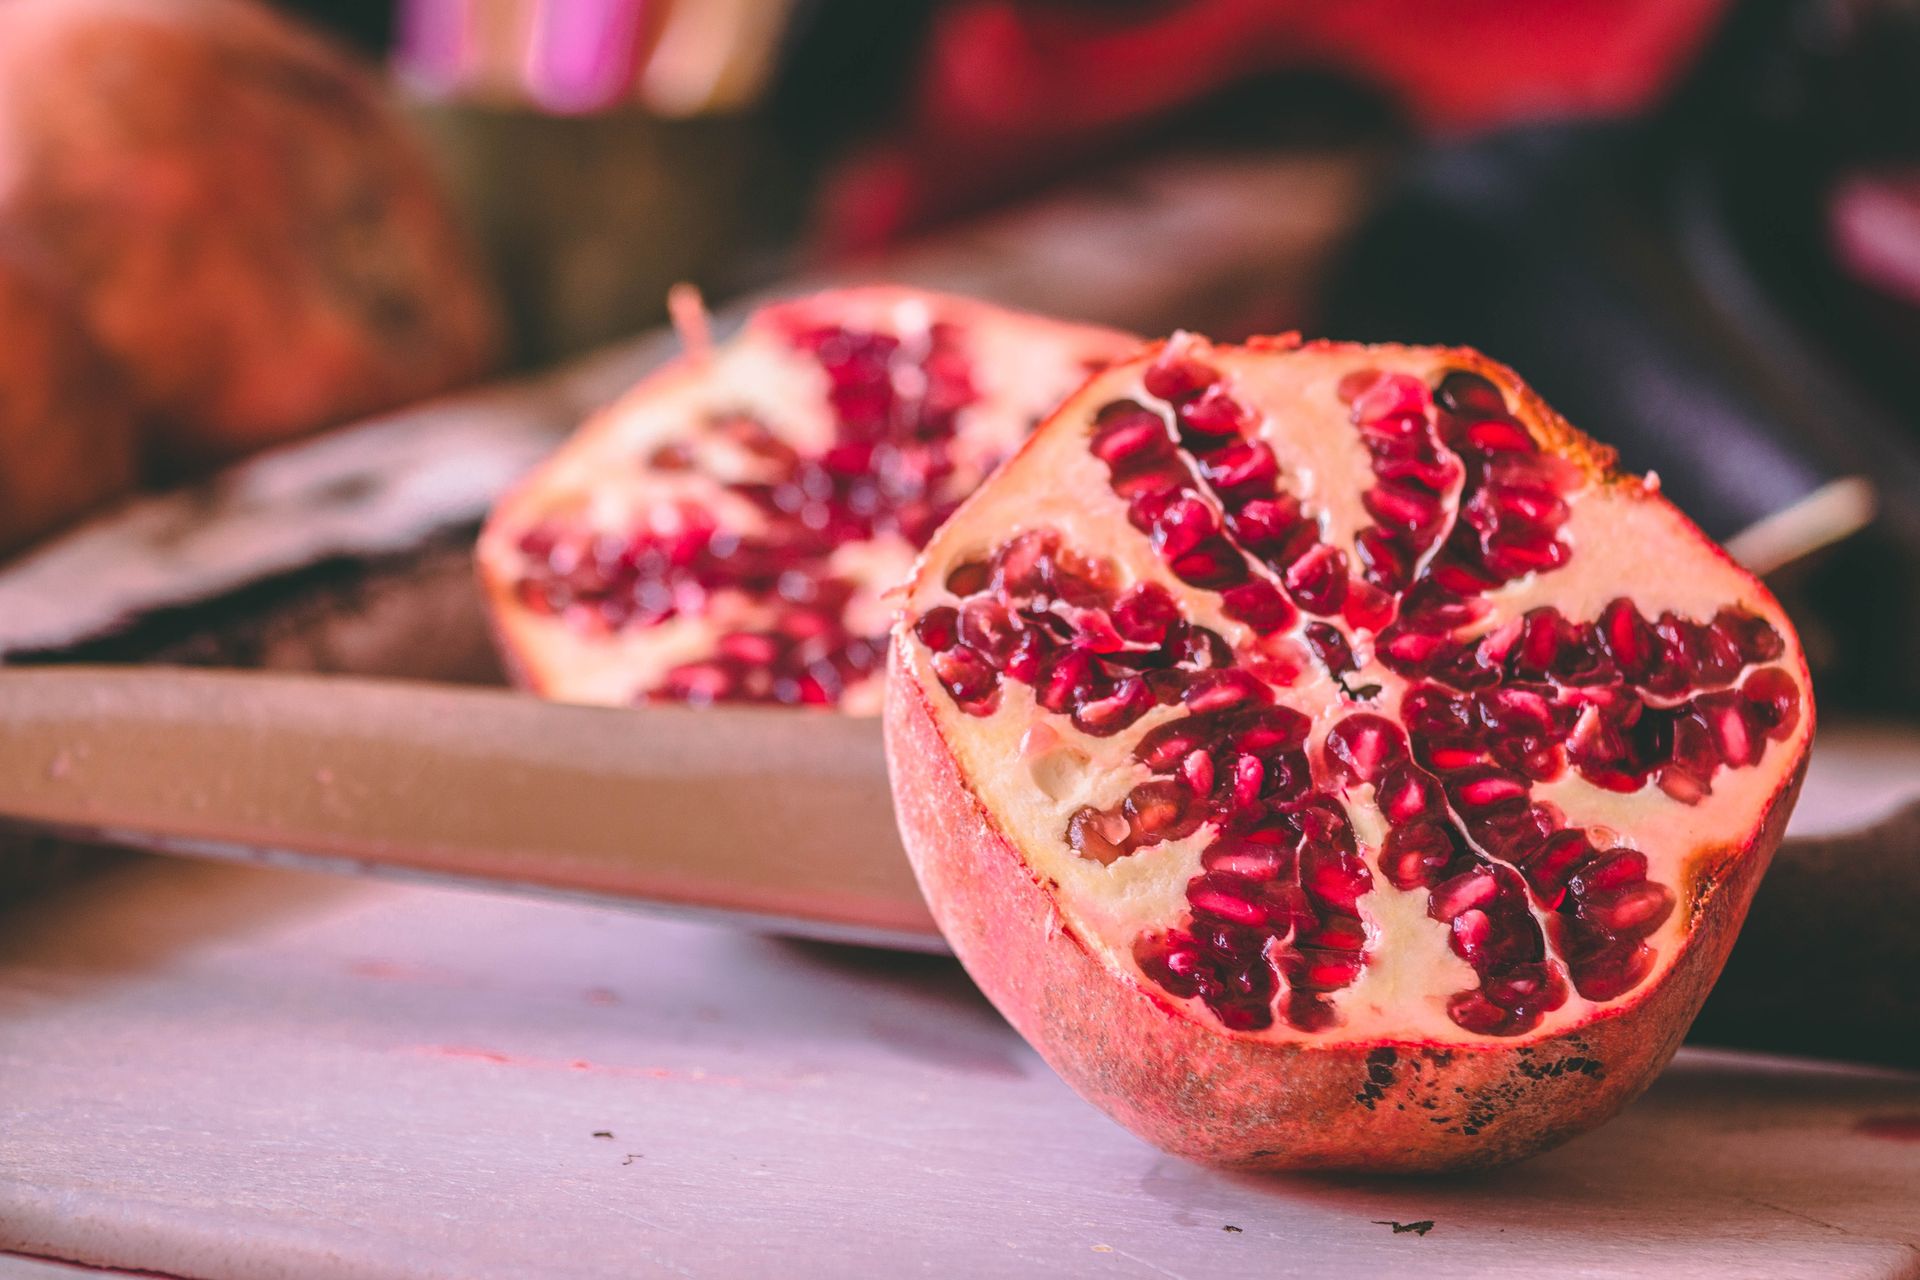 Deseed pomegranate with this super simple technique